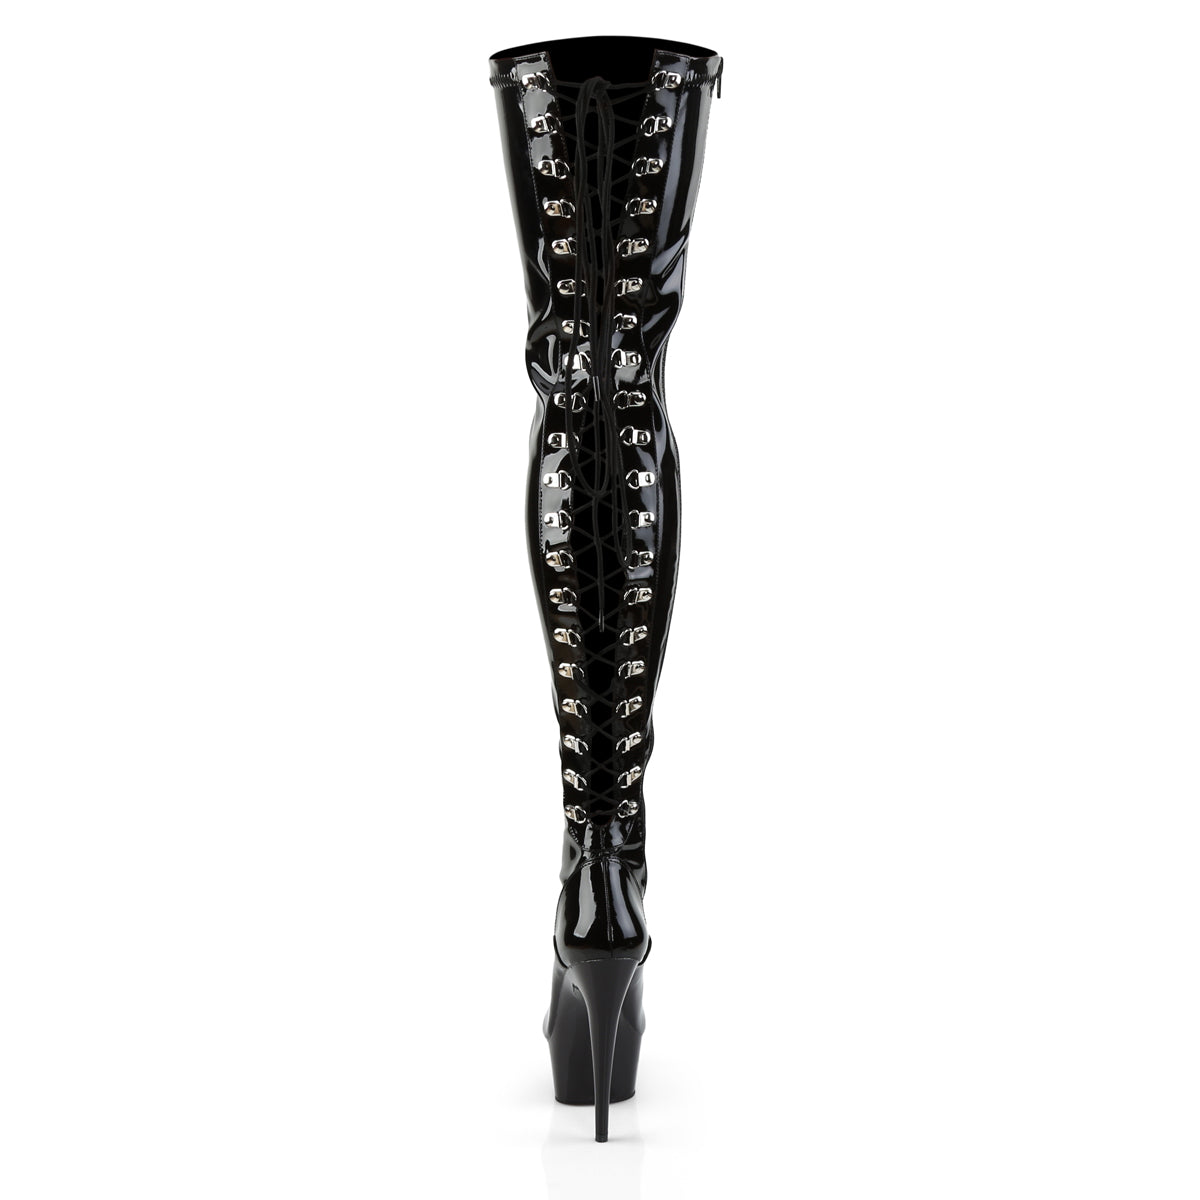 DELIGHT-3063 / B / M 6 "PLEASER FAST DELIVERY 24-48h 